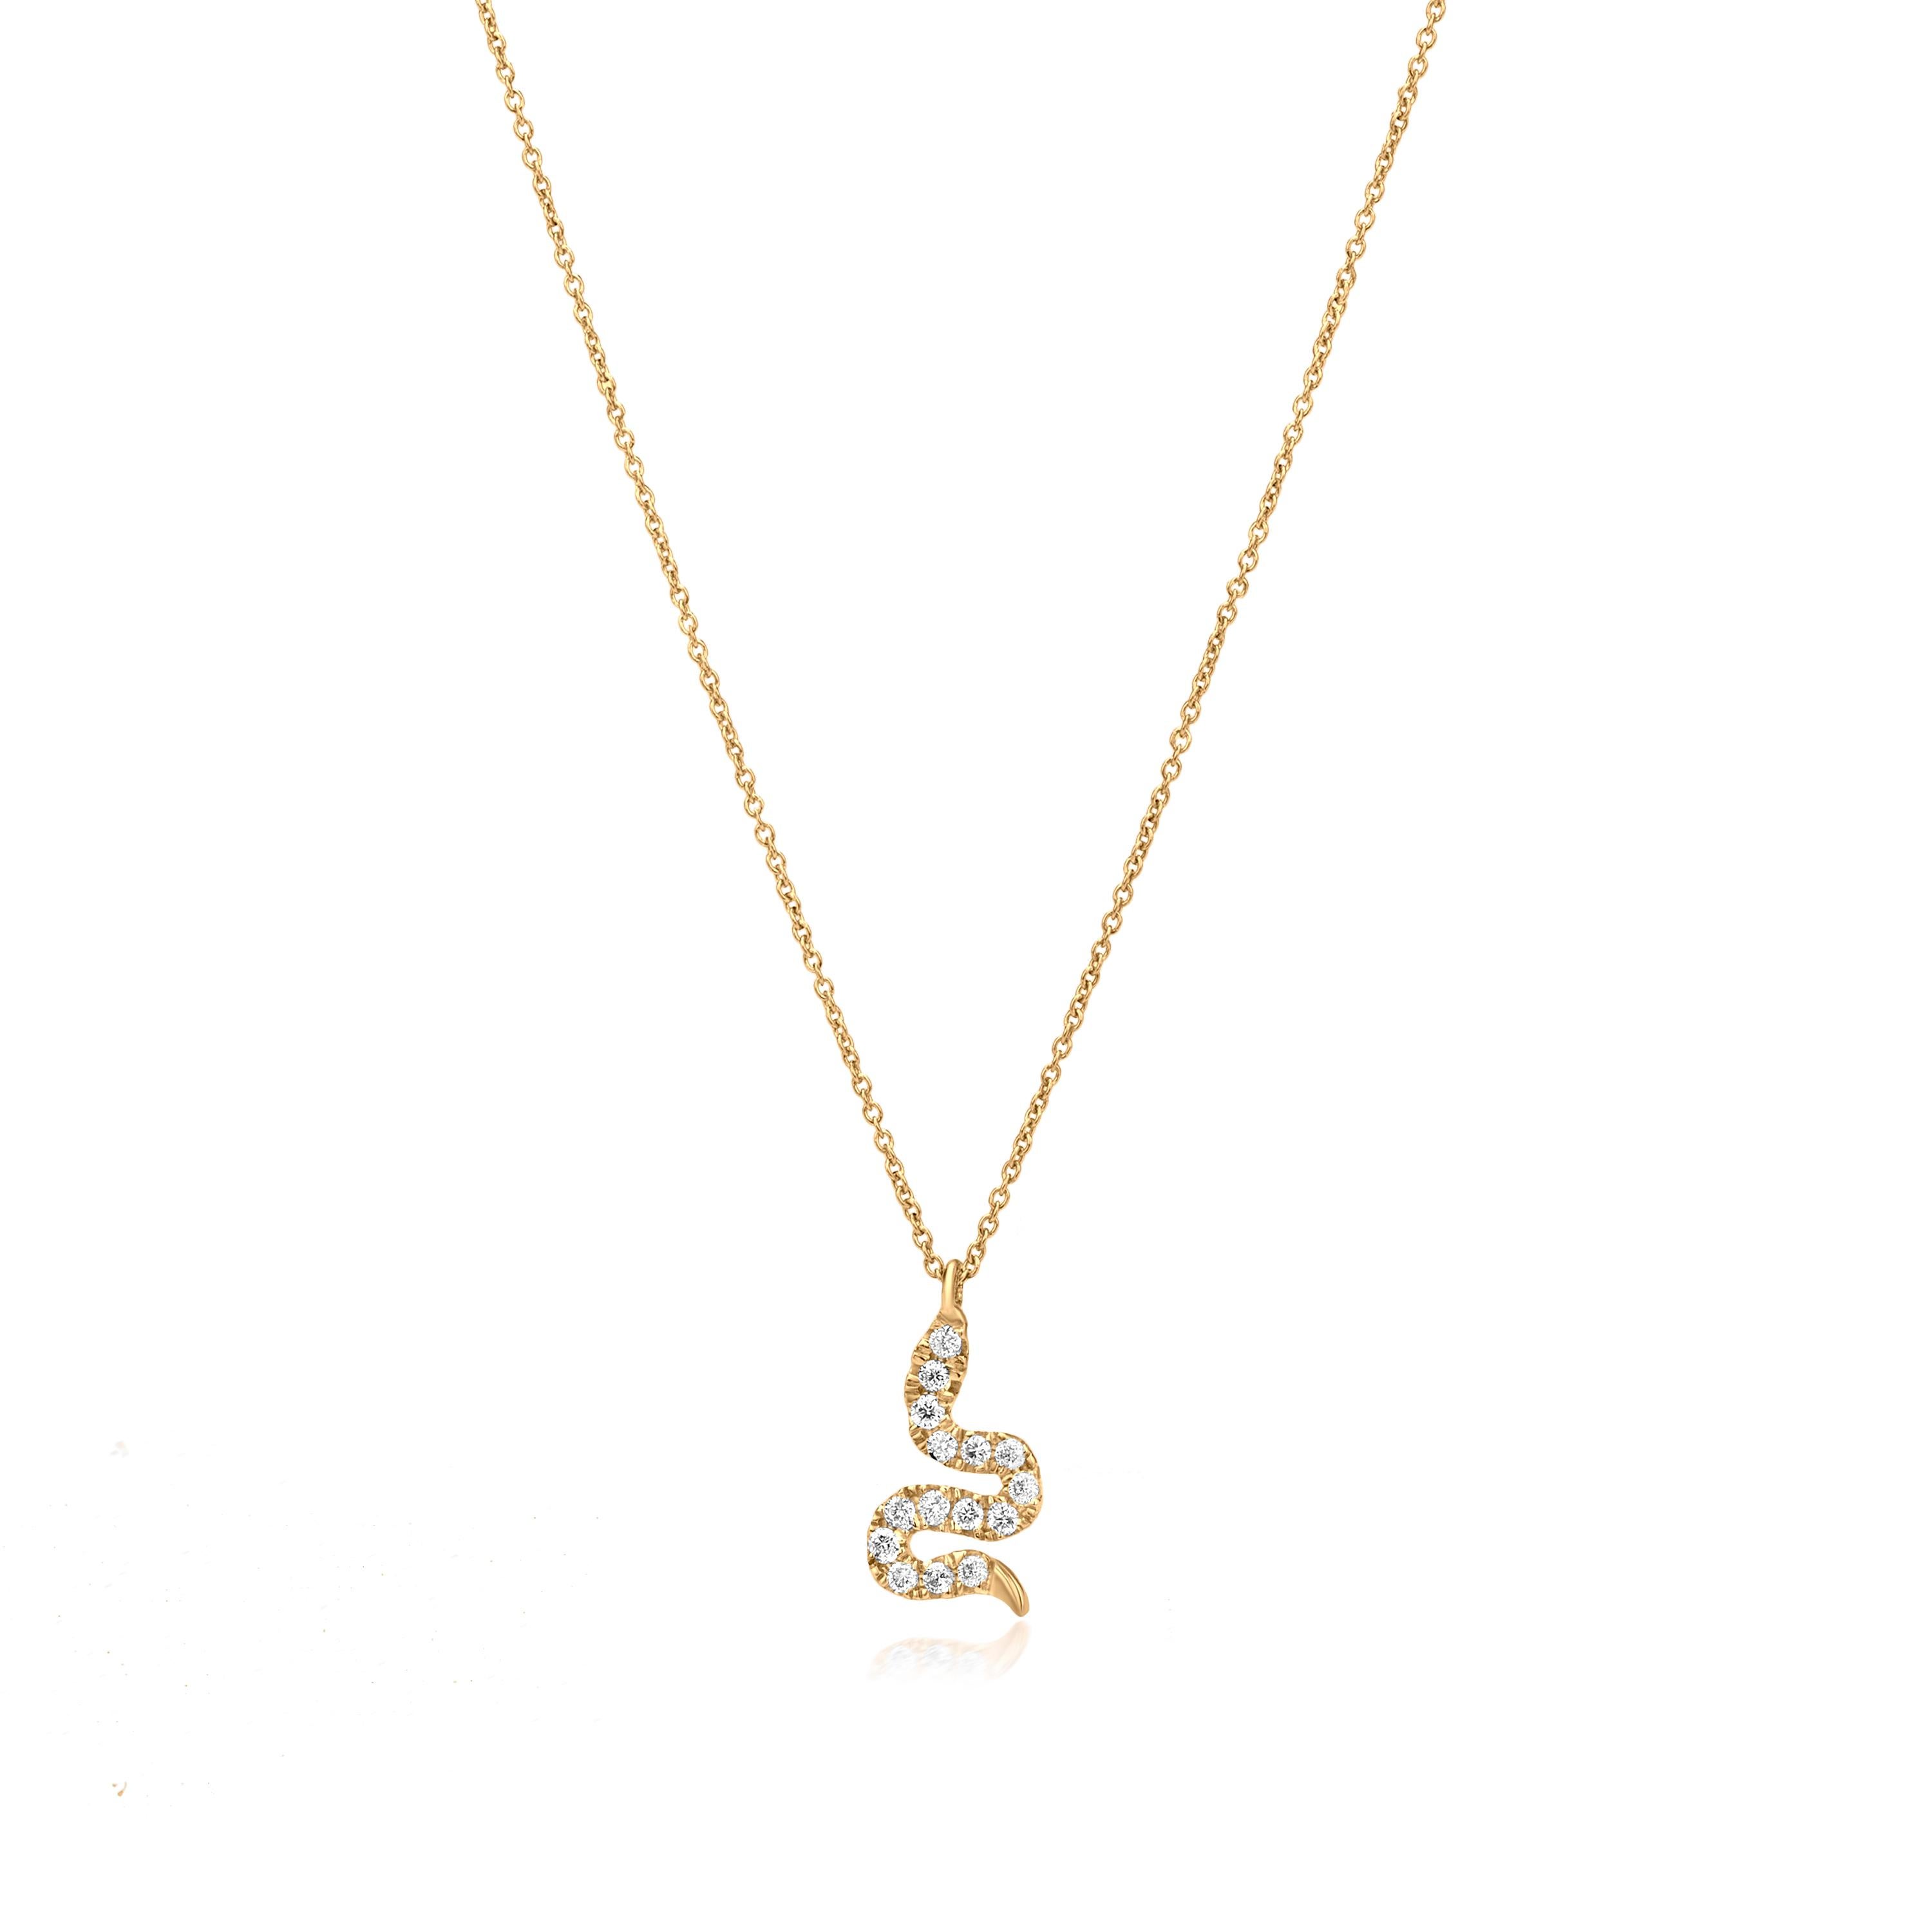 Grace your neckline with a Luxle snake pendant symbolizes endless love. Subtle yet pretty this snake pendant necklace is the new fashion statement. It is featured with 15 round cut diamonds, totaling 0.11Cts embellished in an intricately crafted